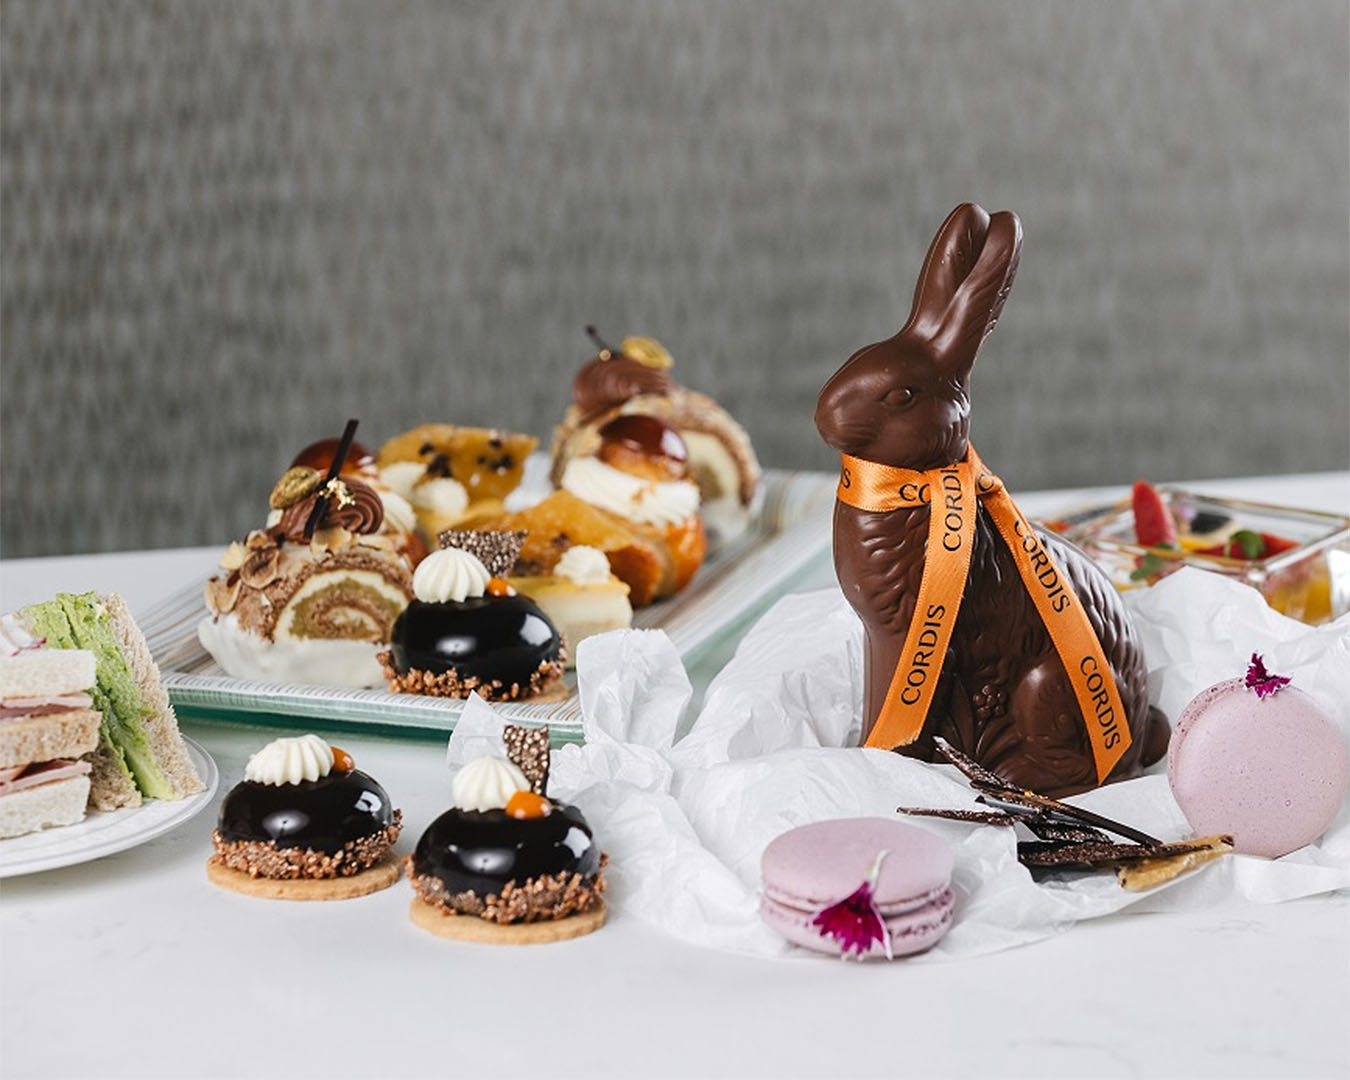 The Easter high tea at Cordis shows lots of Easter treats laid out on the table.